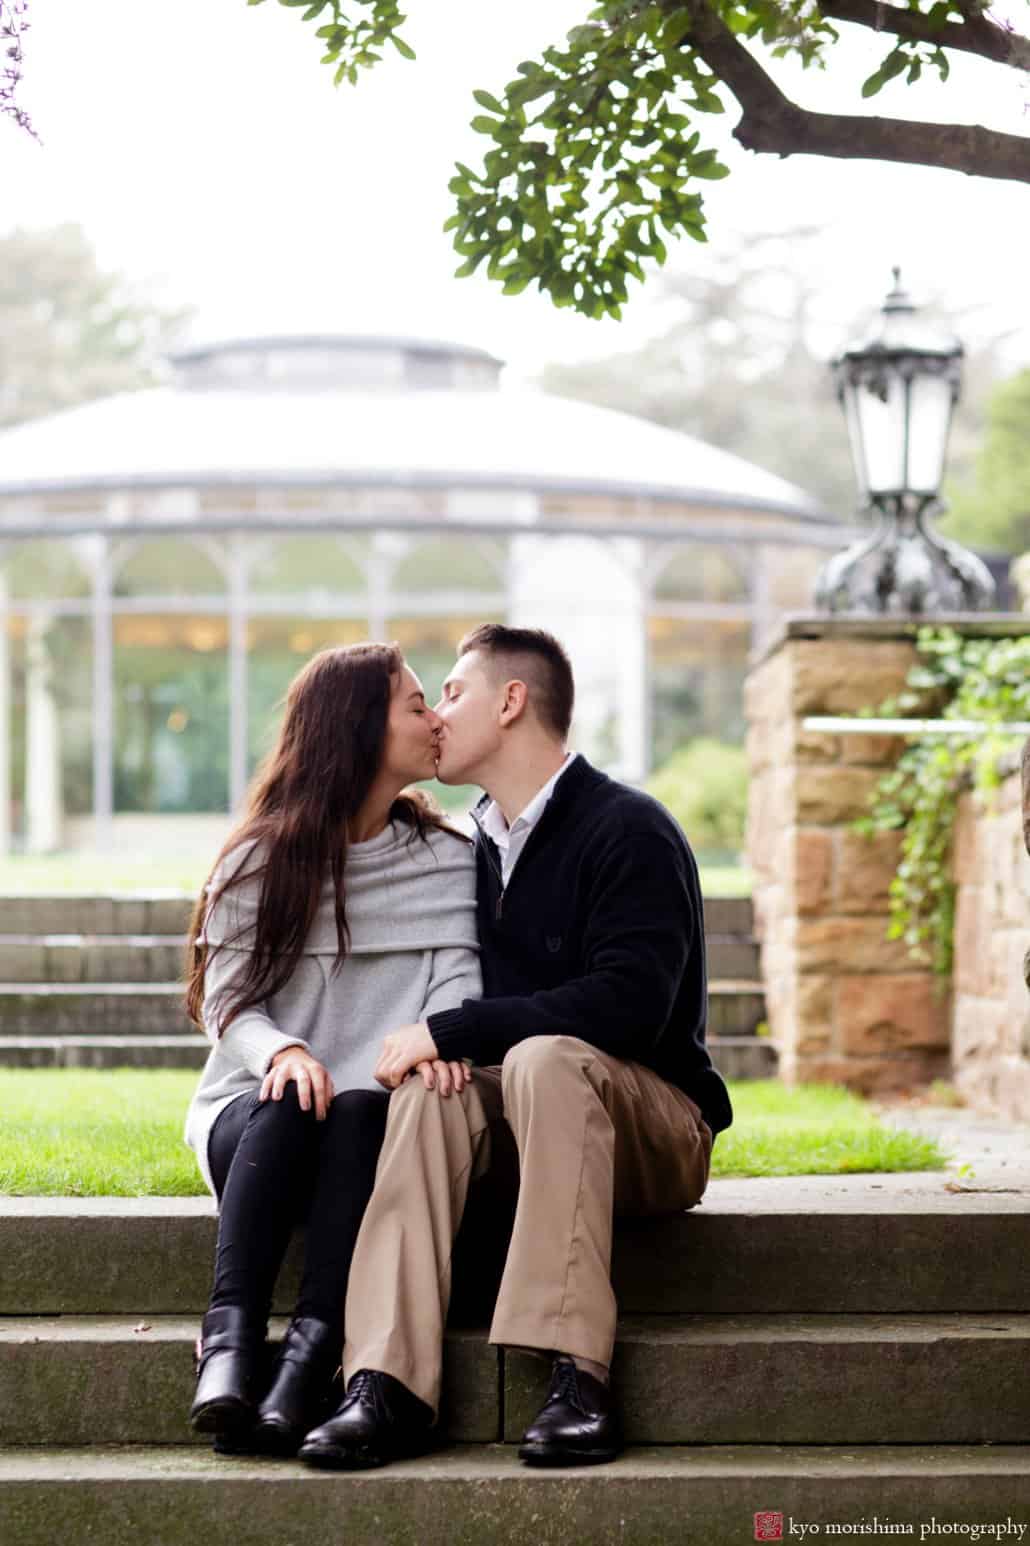 Jasna Polana Princeton engagement picture with glass ballroom in the background, photographed by Kyo Morishima